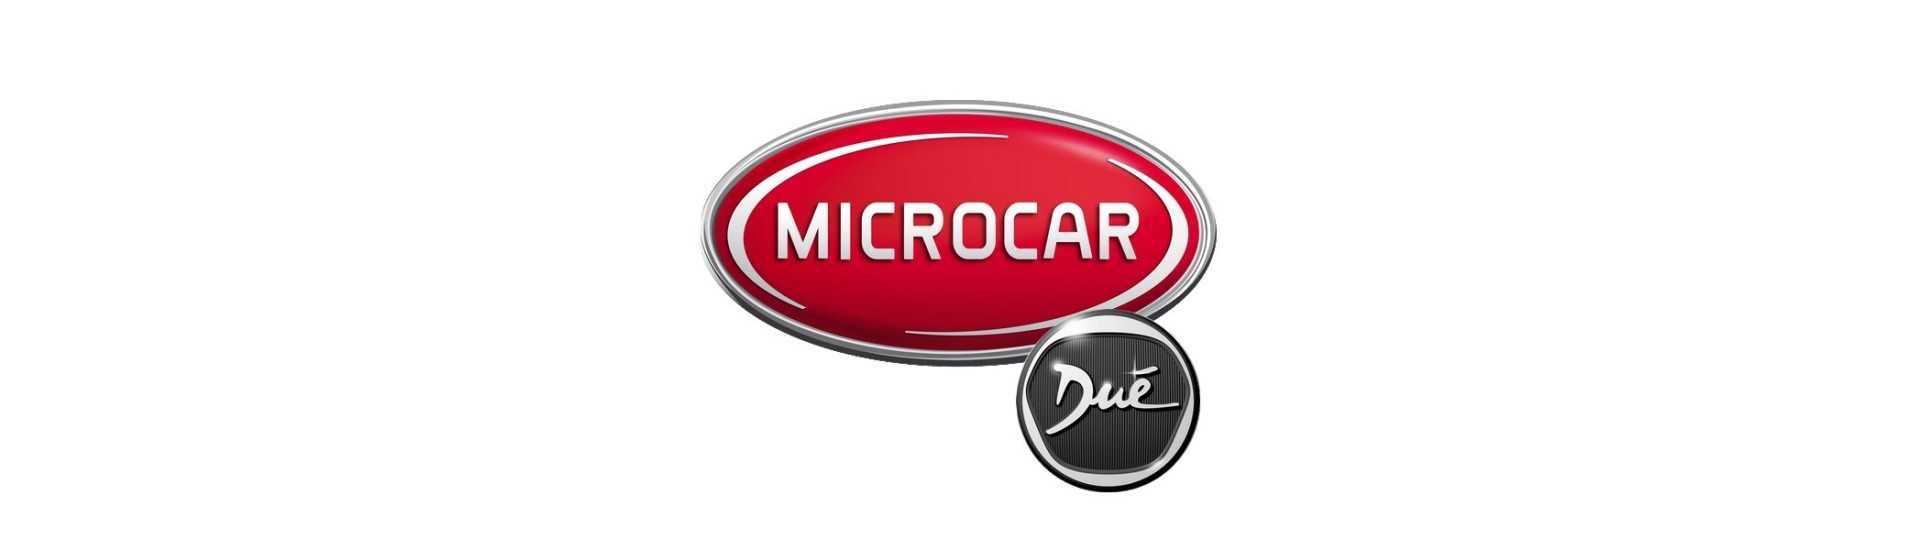 Air deflector at the best price car without a permit Microcar Dué